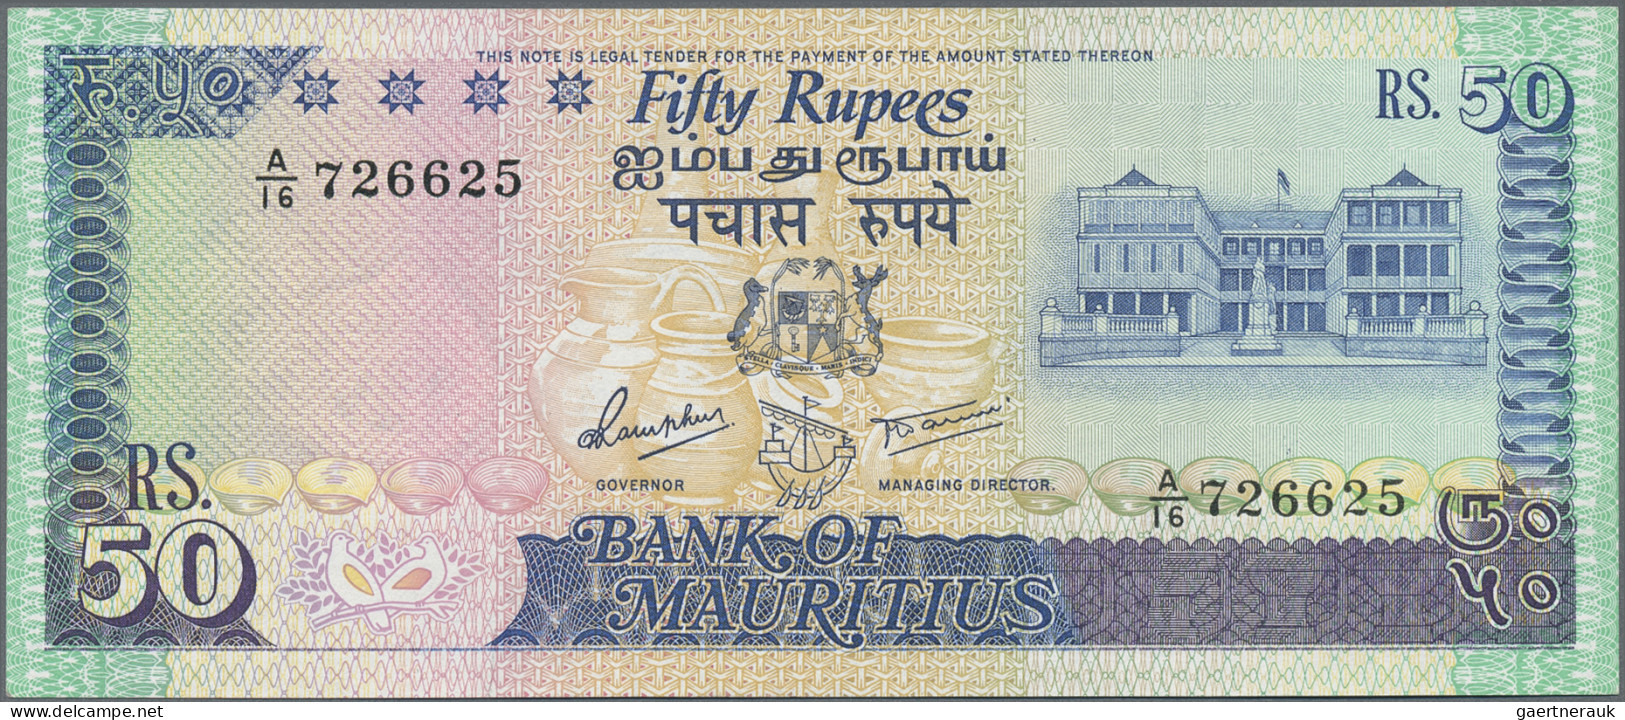 Mauritius: Bank of Mauritius, lot with 5 banknotes, series 1985/86, with 5 Rupee